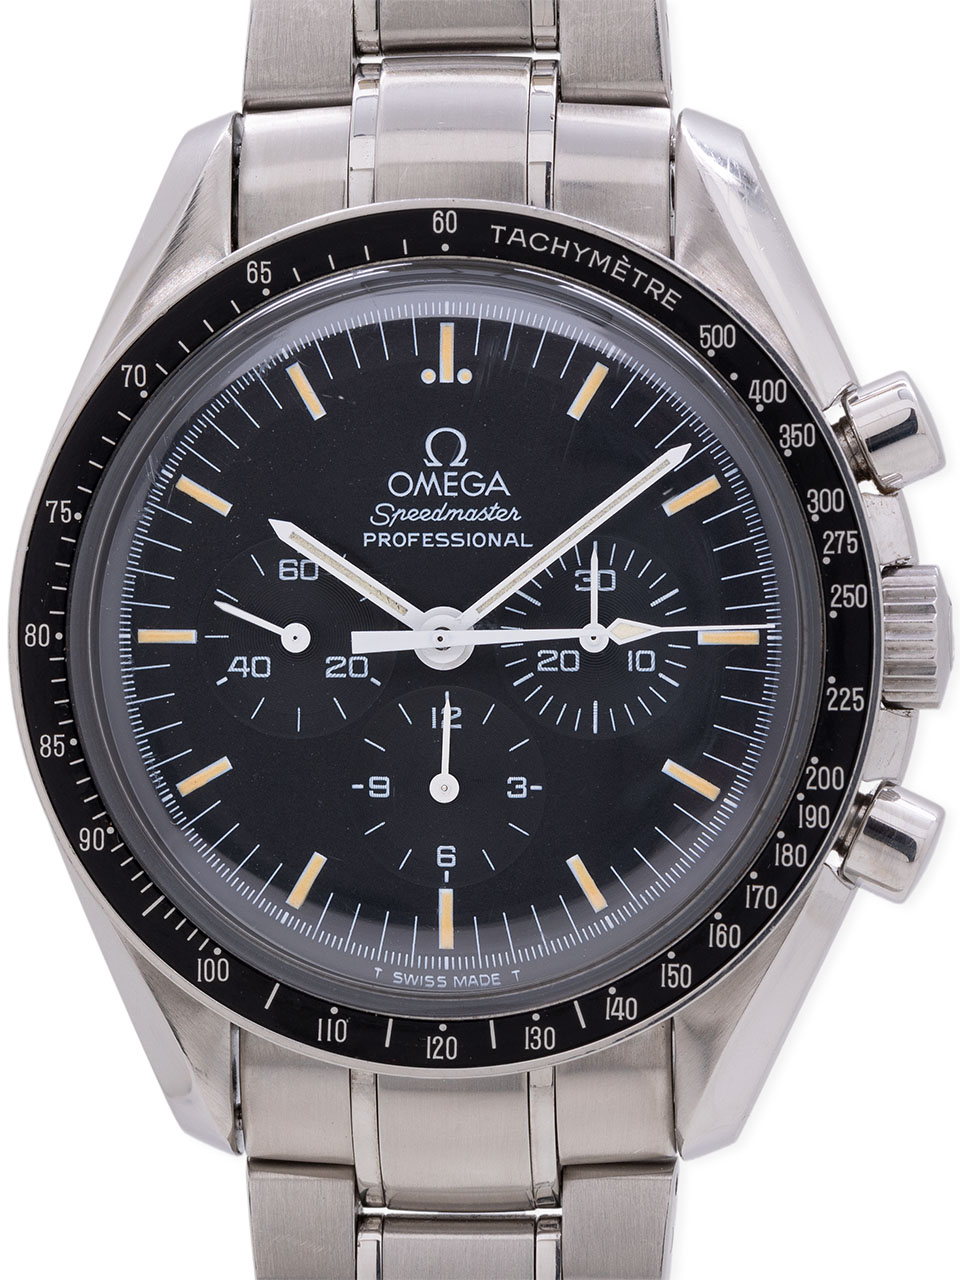 Omega Archives - Wanna Buy A Watch?